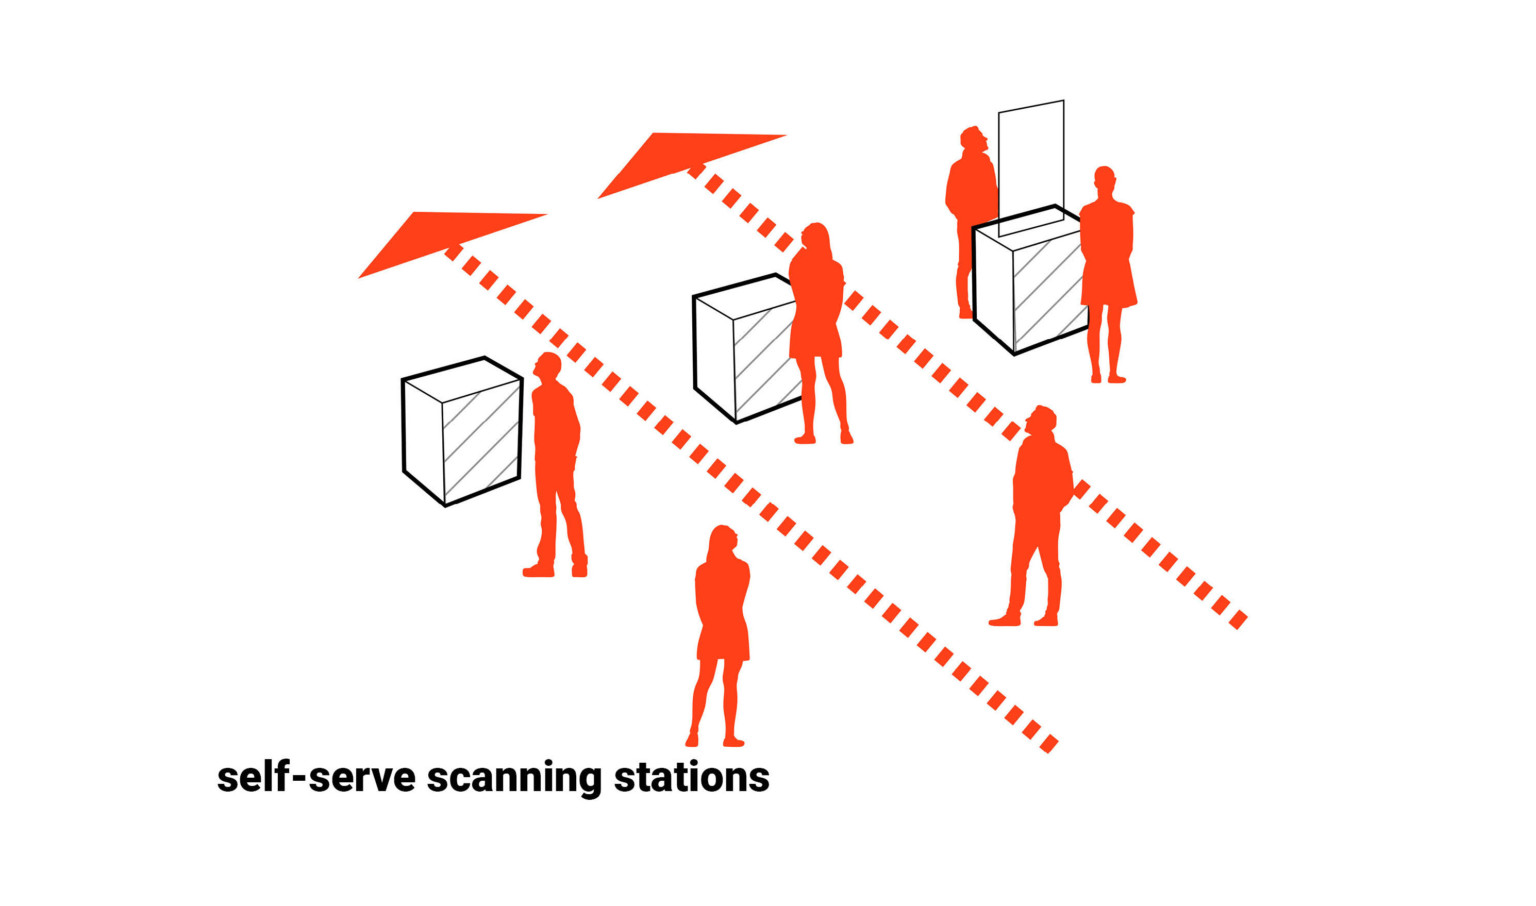 Diagram of socially distanced lines passing by self-serve ticket scanning machines